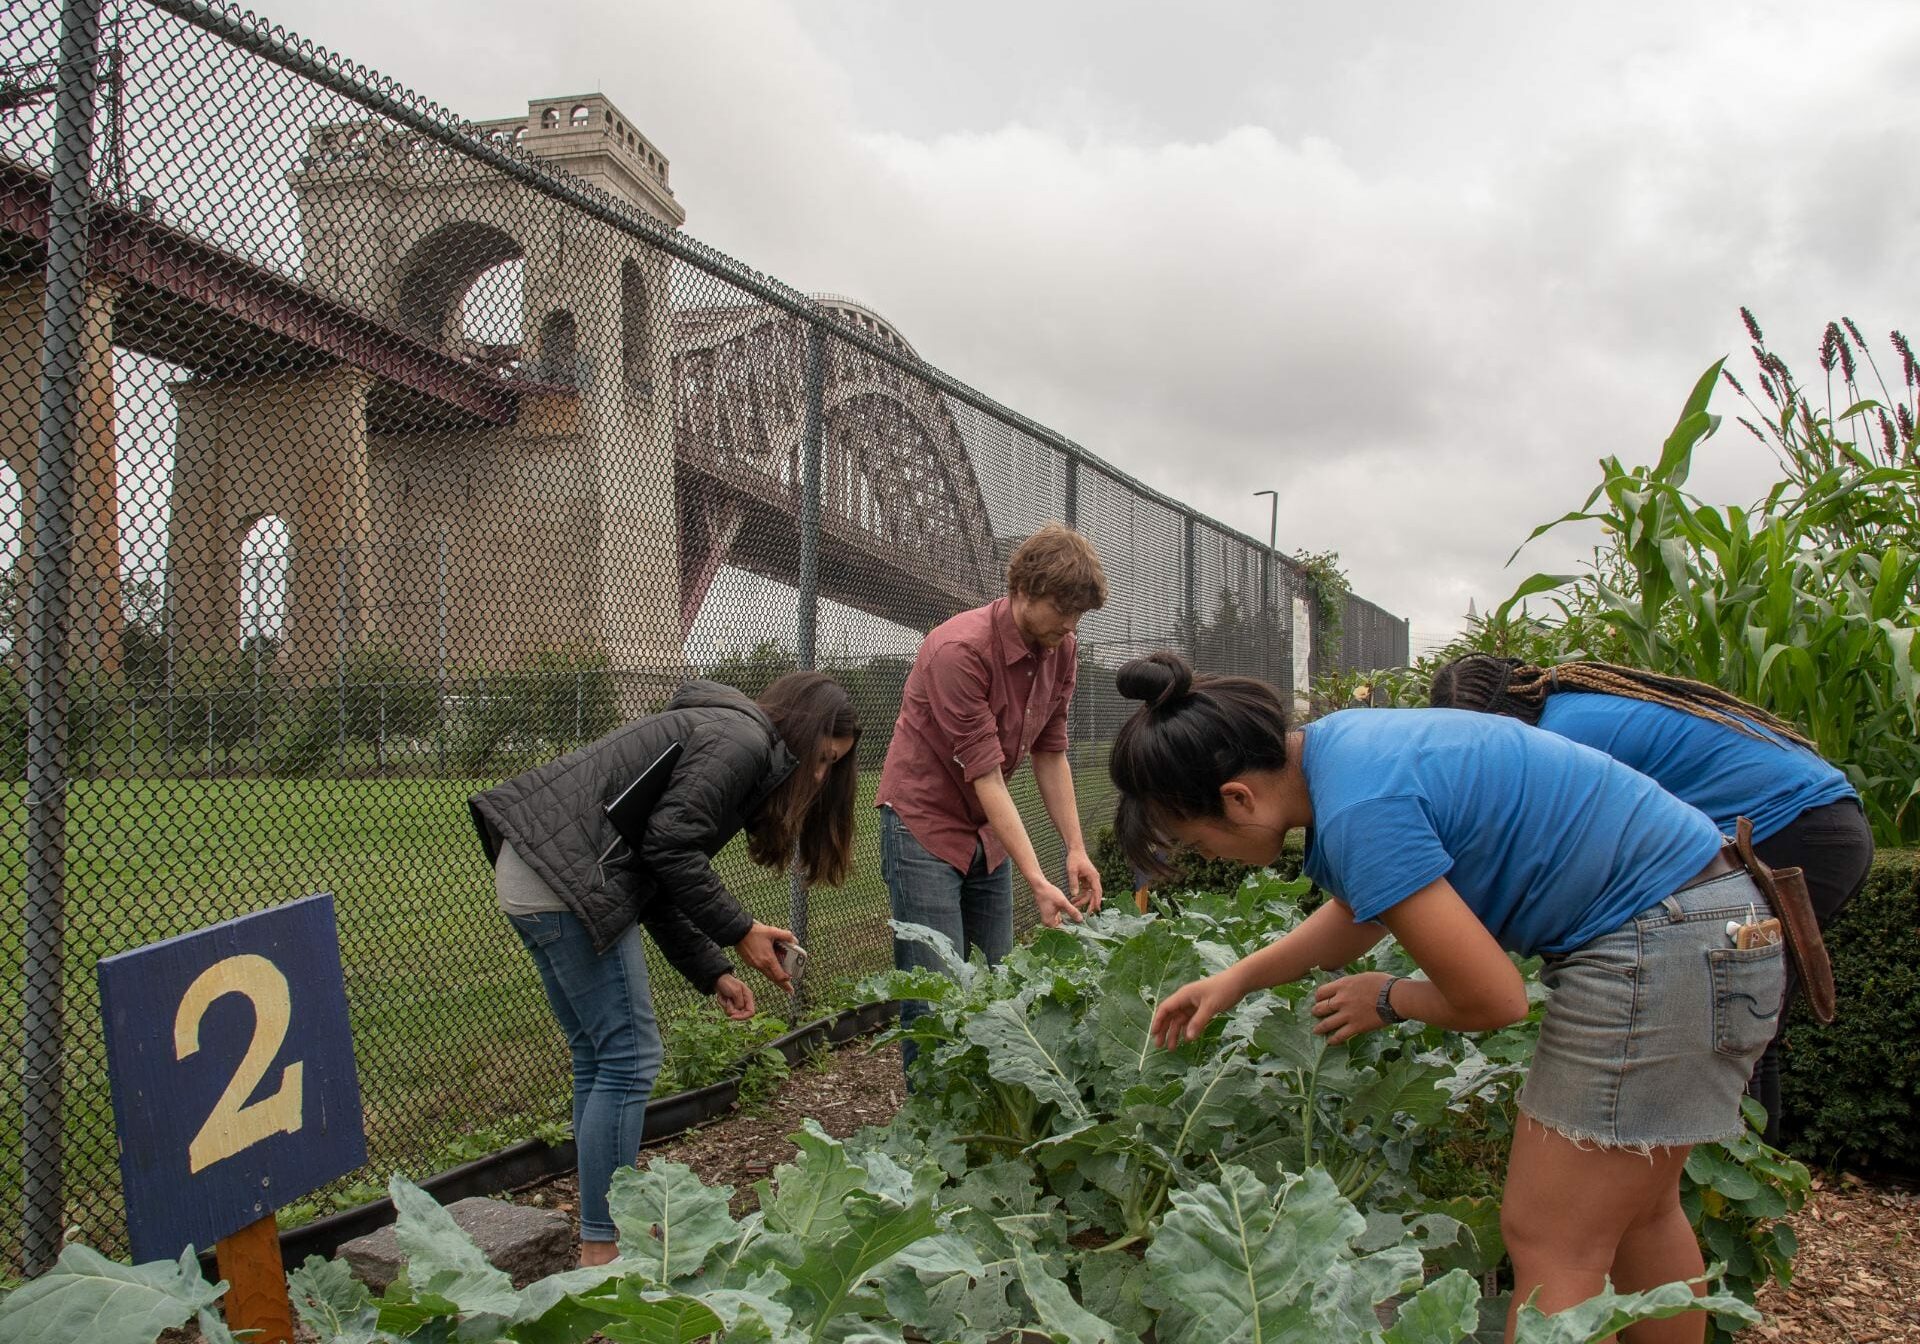 In the shadow of New York City’s Hell Gate Bridge, Cornell Cooperative Extension urban agriculture specialists Yolanda Gonzalez, left, and Sam Anderson, center scout for harlequin bugs and consult with farmers at Randall's Island Urban Farm in New York City.
R.J. Anderson / Cornell Cooperative Extension